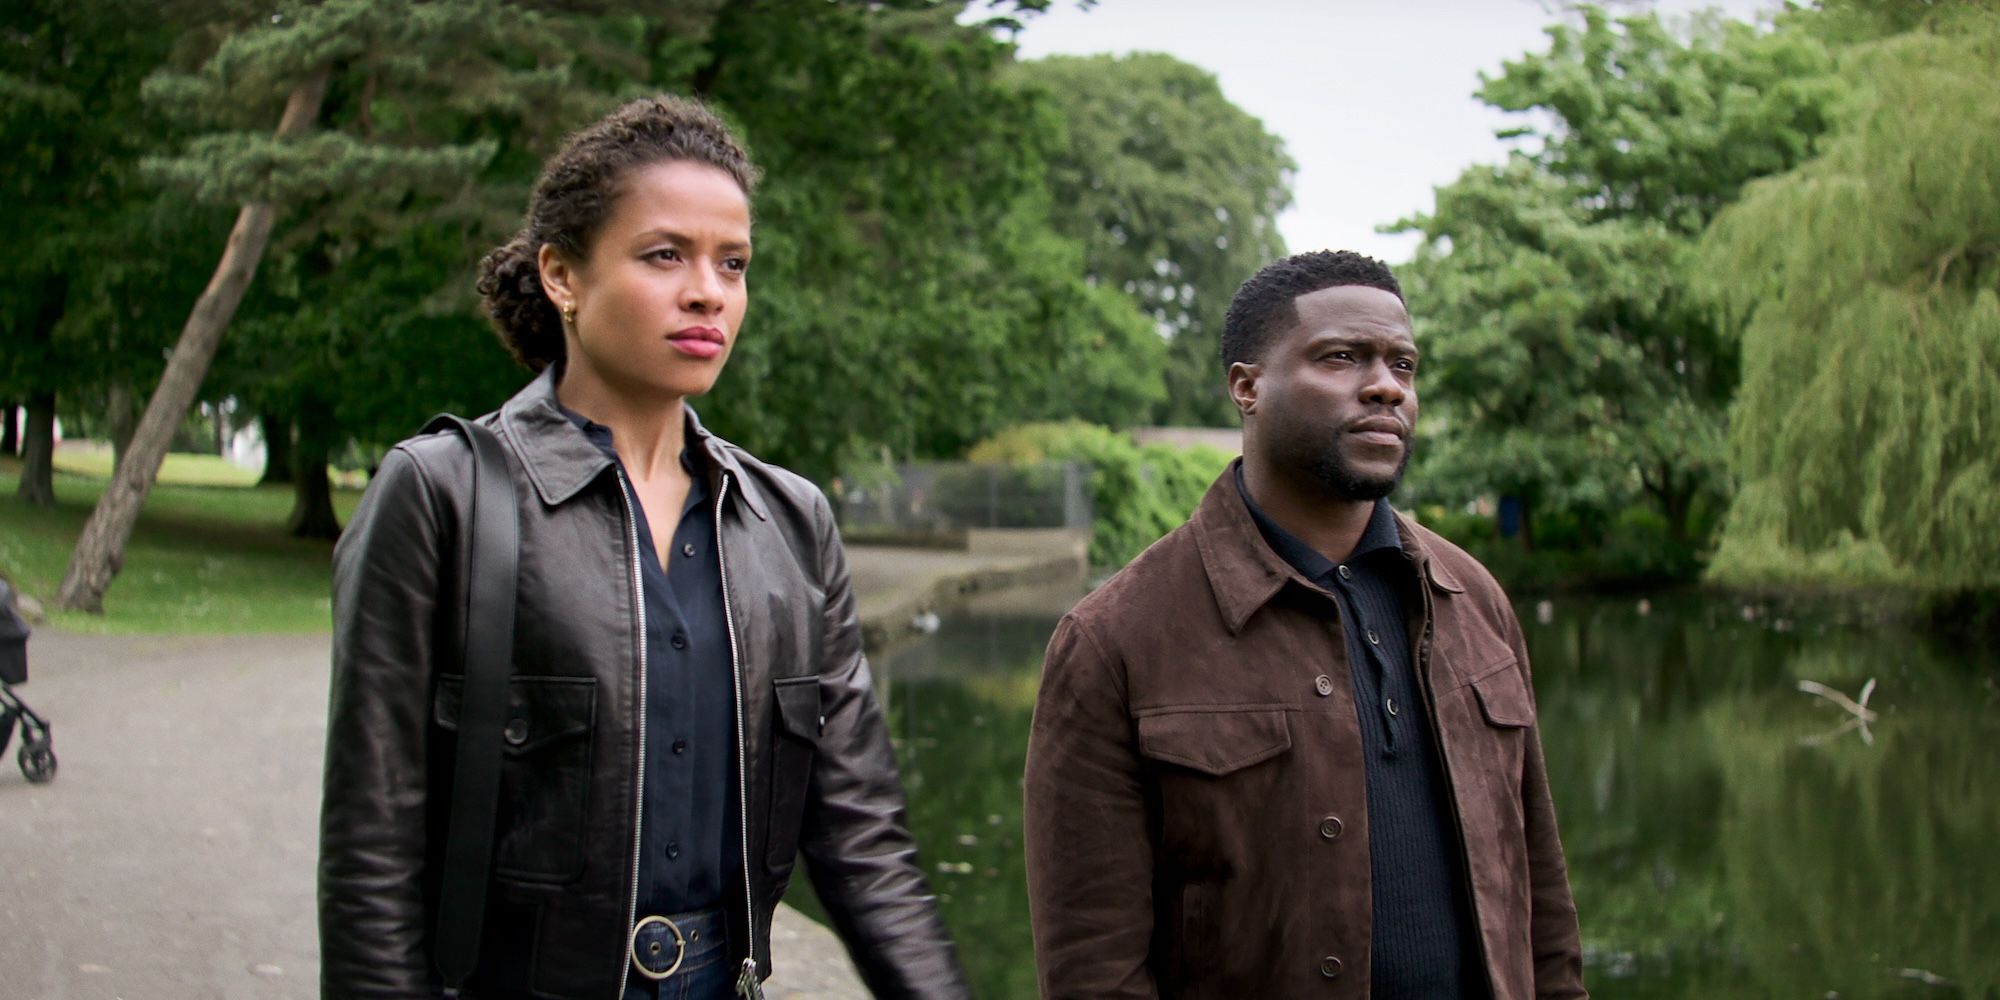 How Kevin Hart’s New Netflix Action Comedy Was Mistaken For James Bond Movie: “It’s Not Bond”